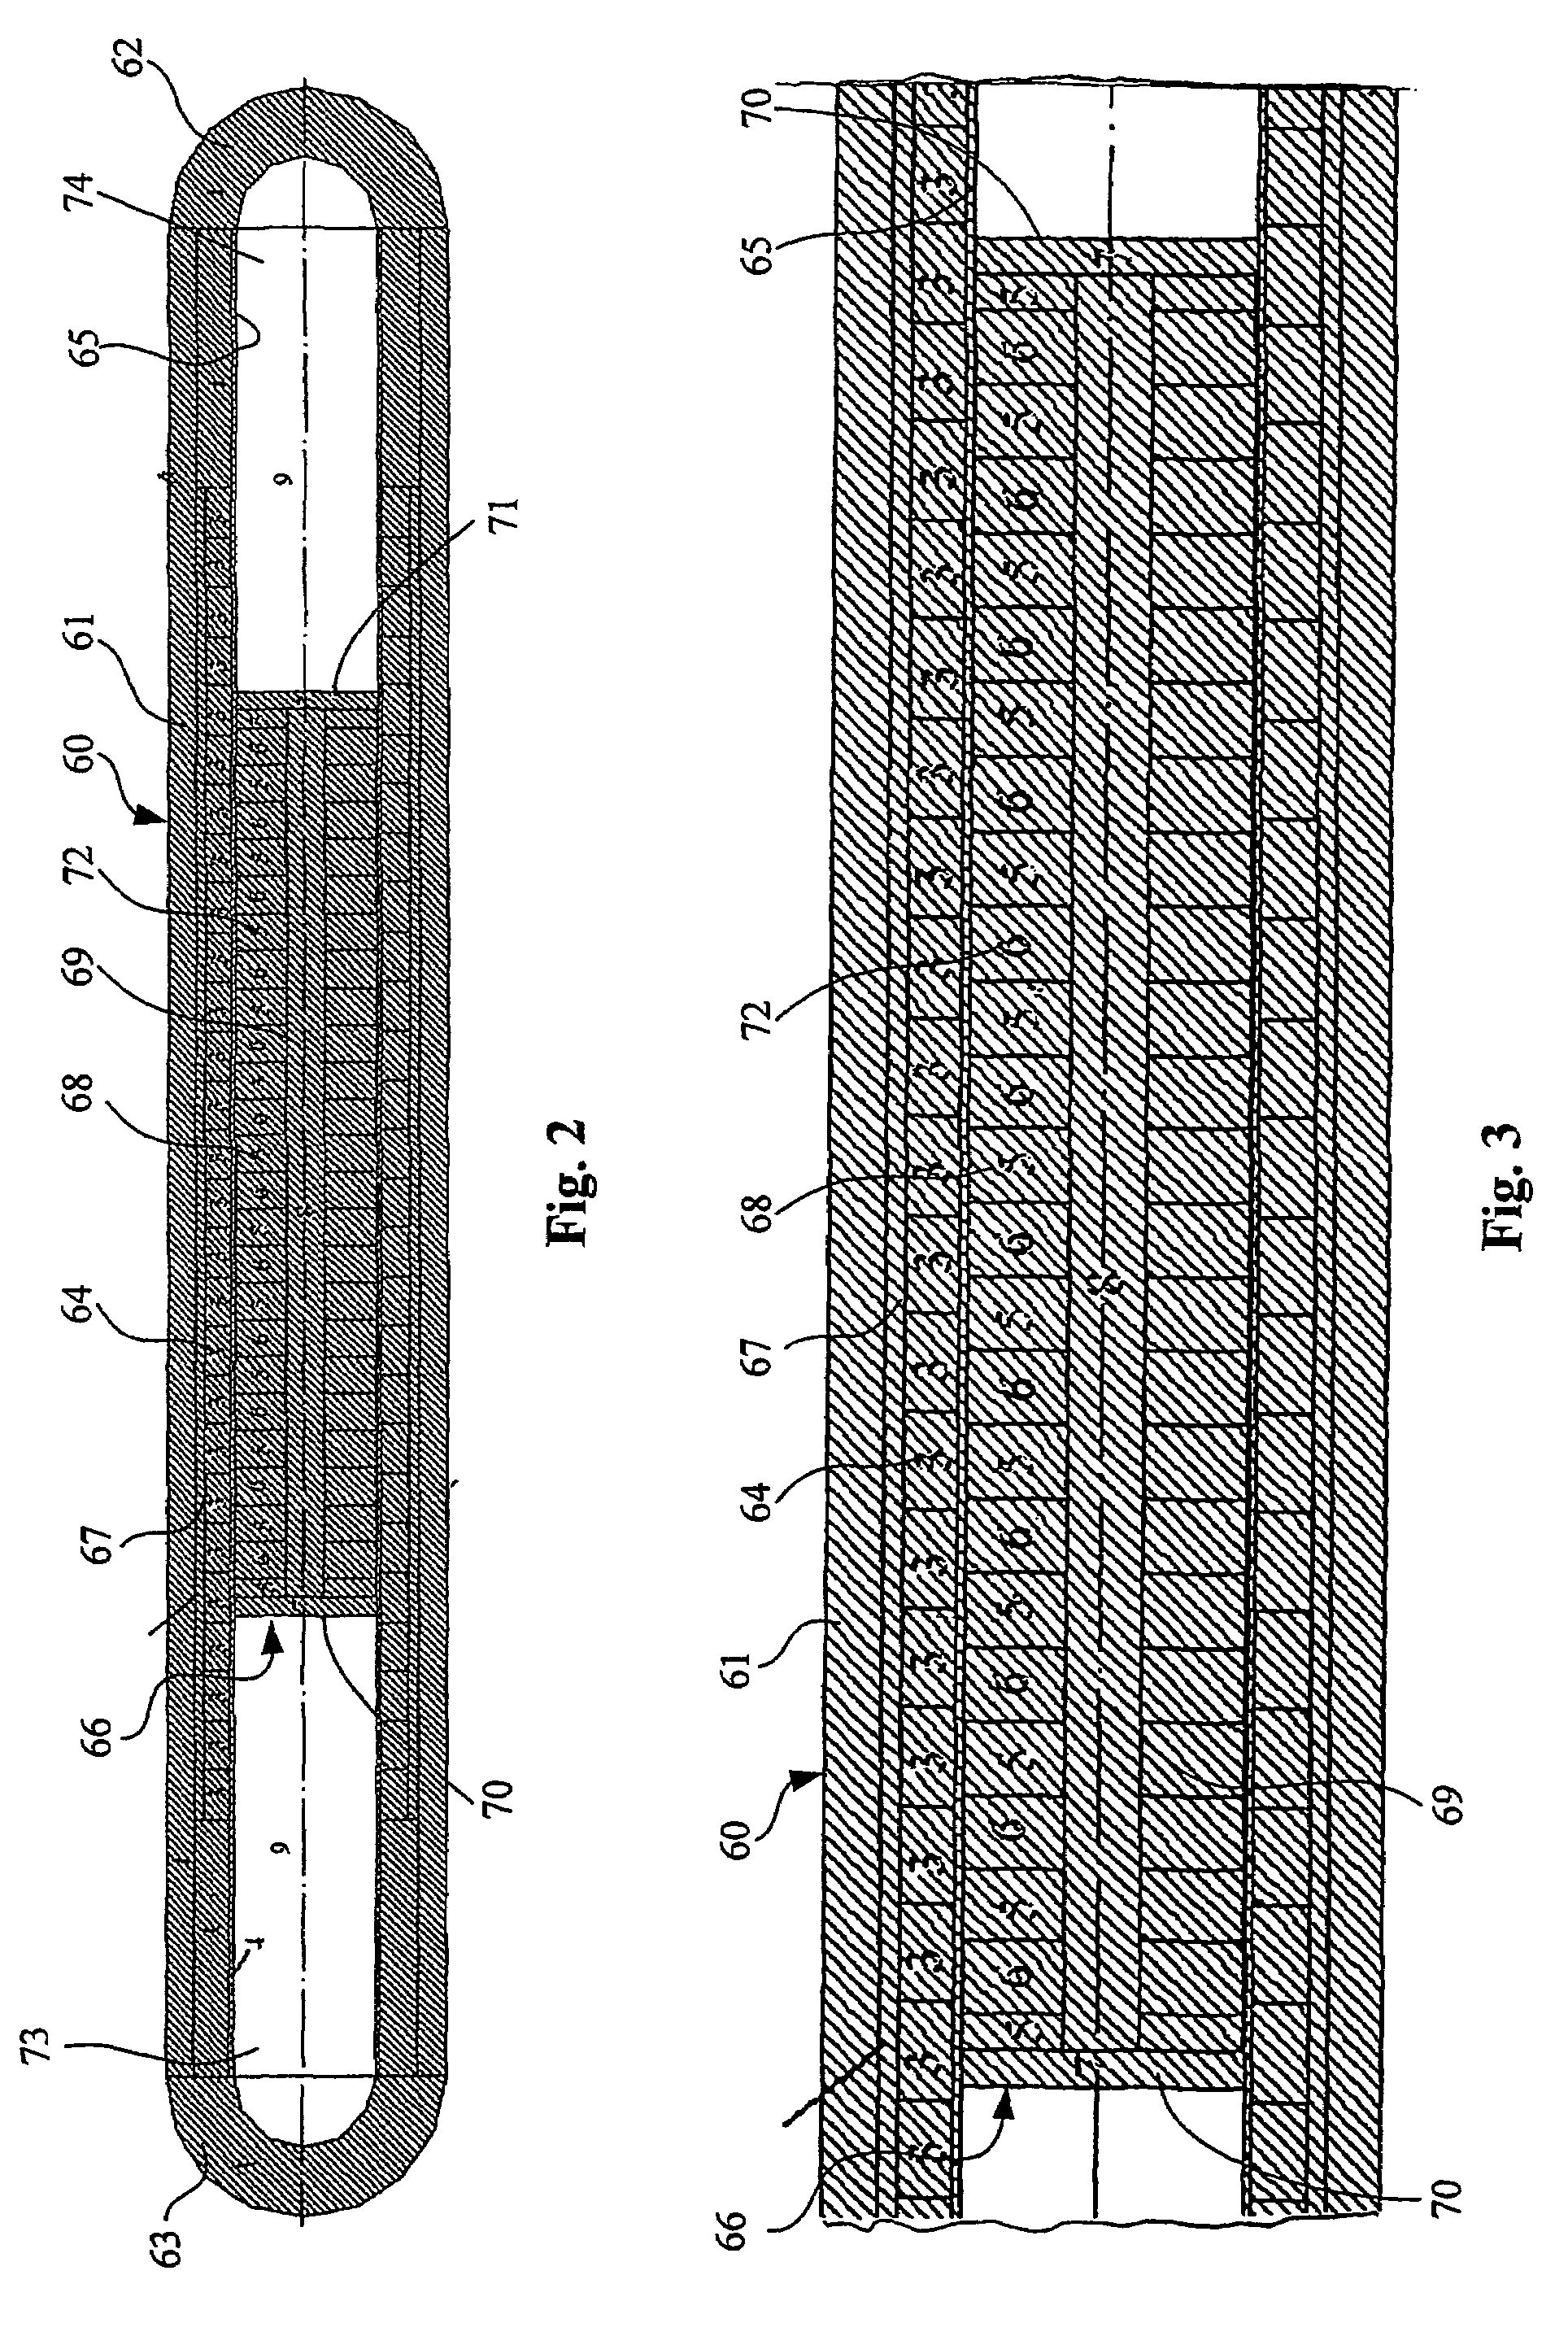 Working machine with an electromagnetic converter